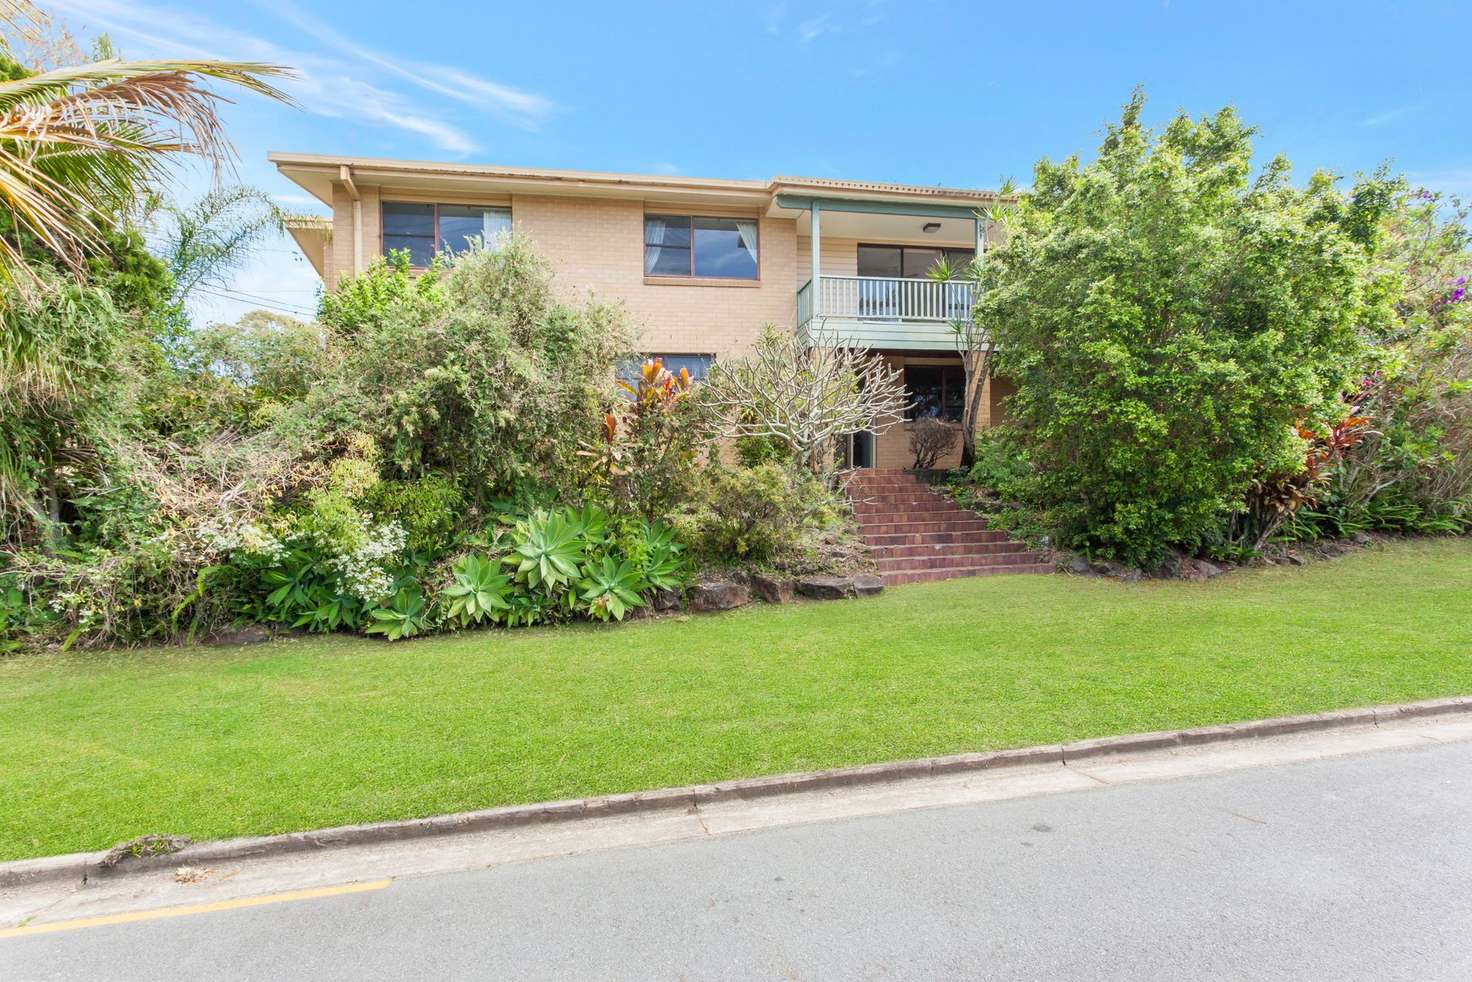 Main view of Homely house listing, 45 Skyline Terrace, Burleigh Heads QLD 4220